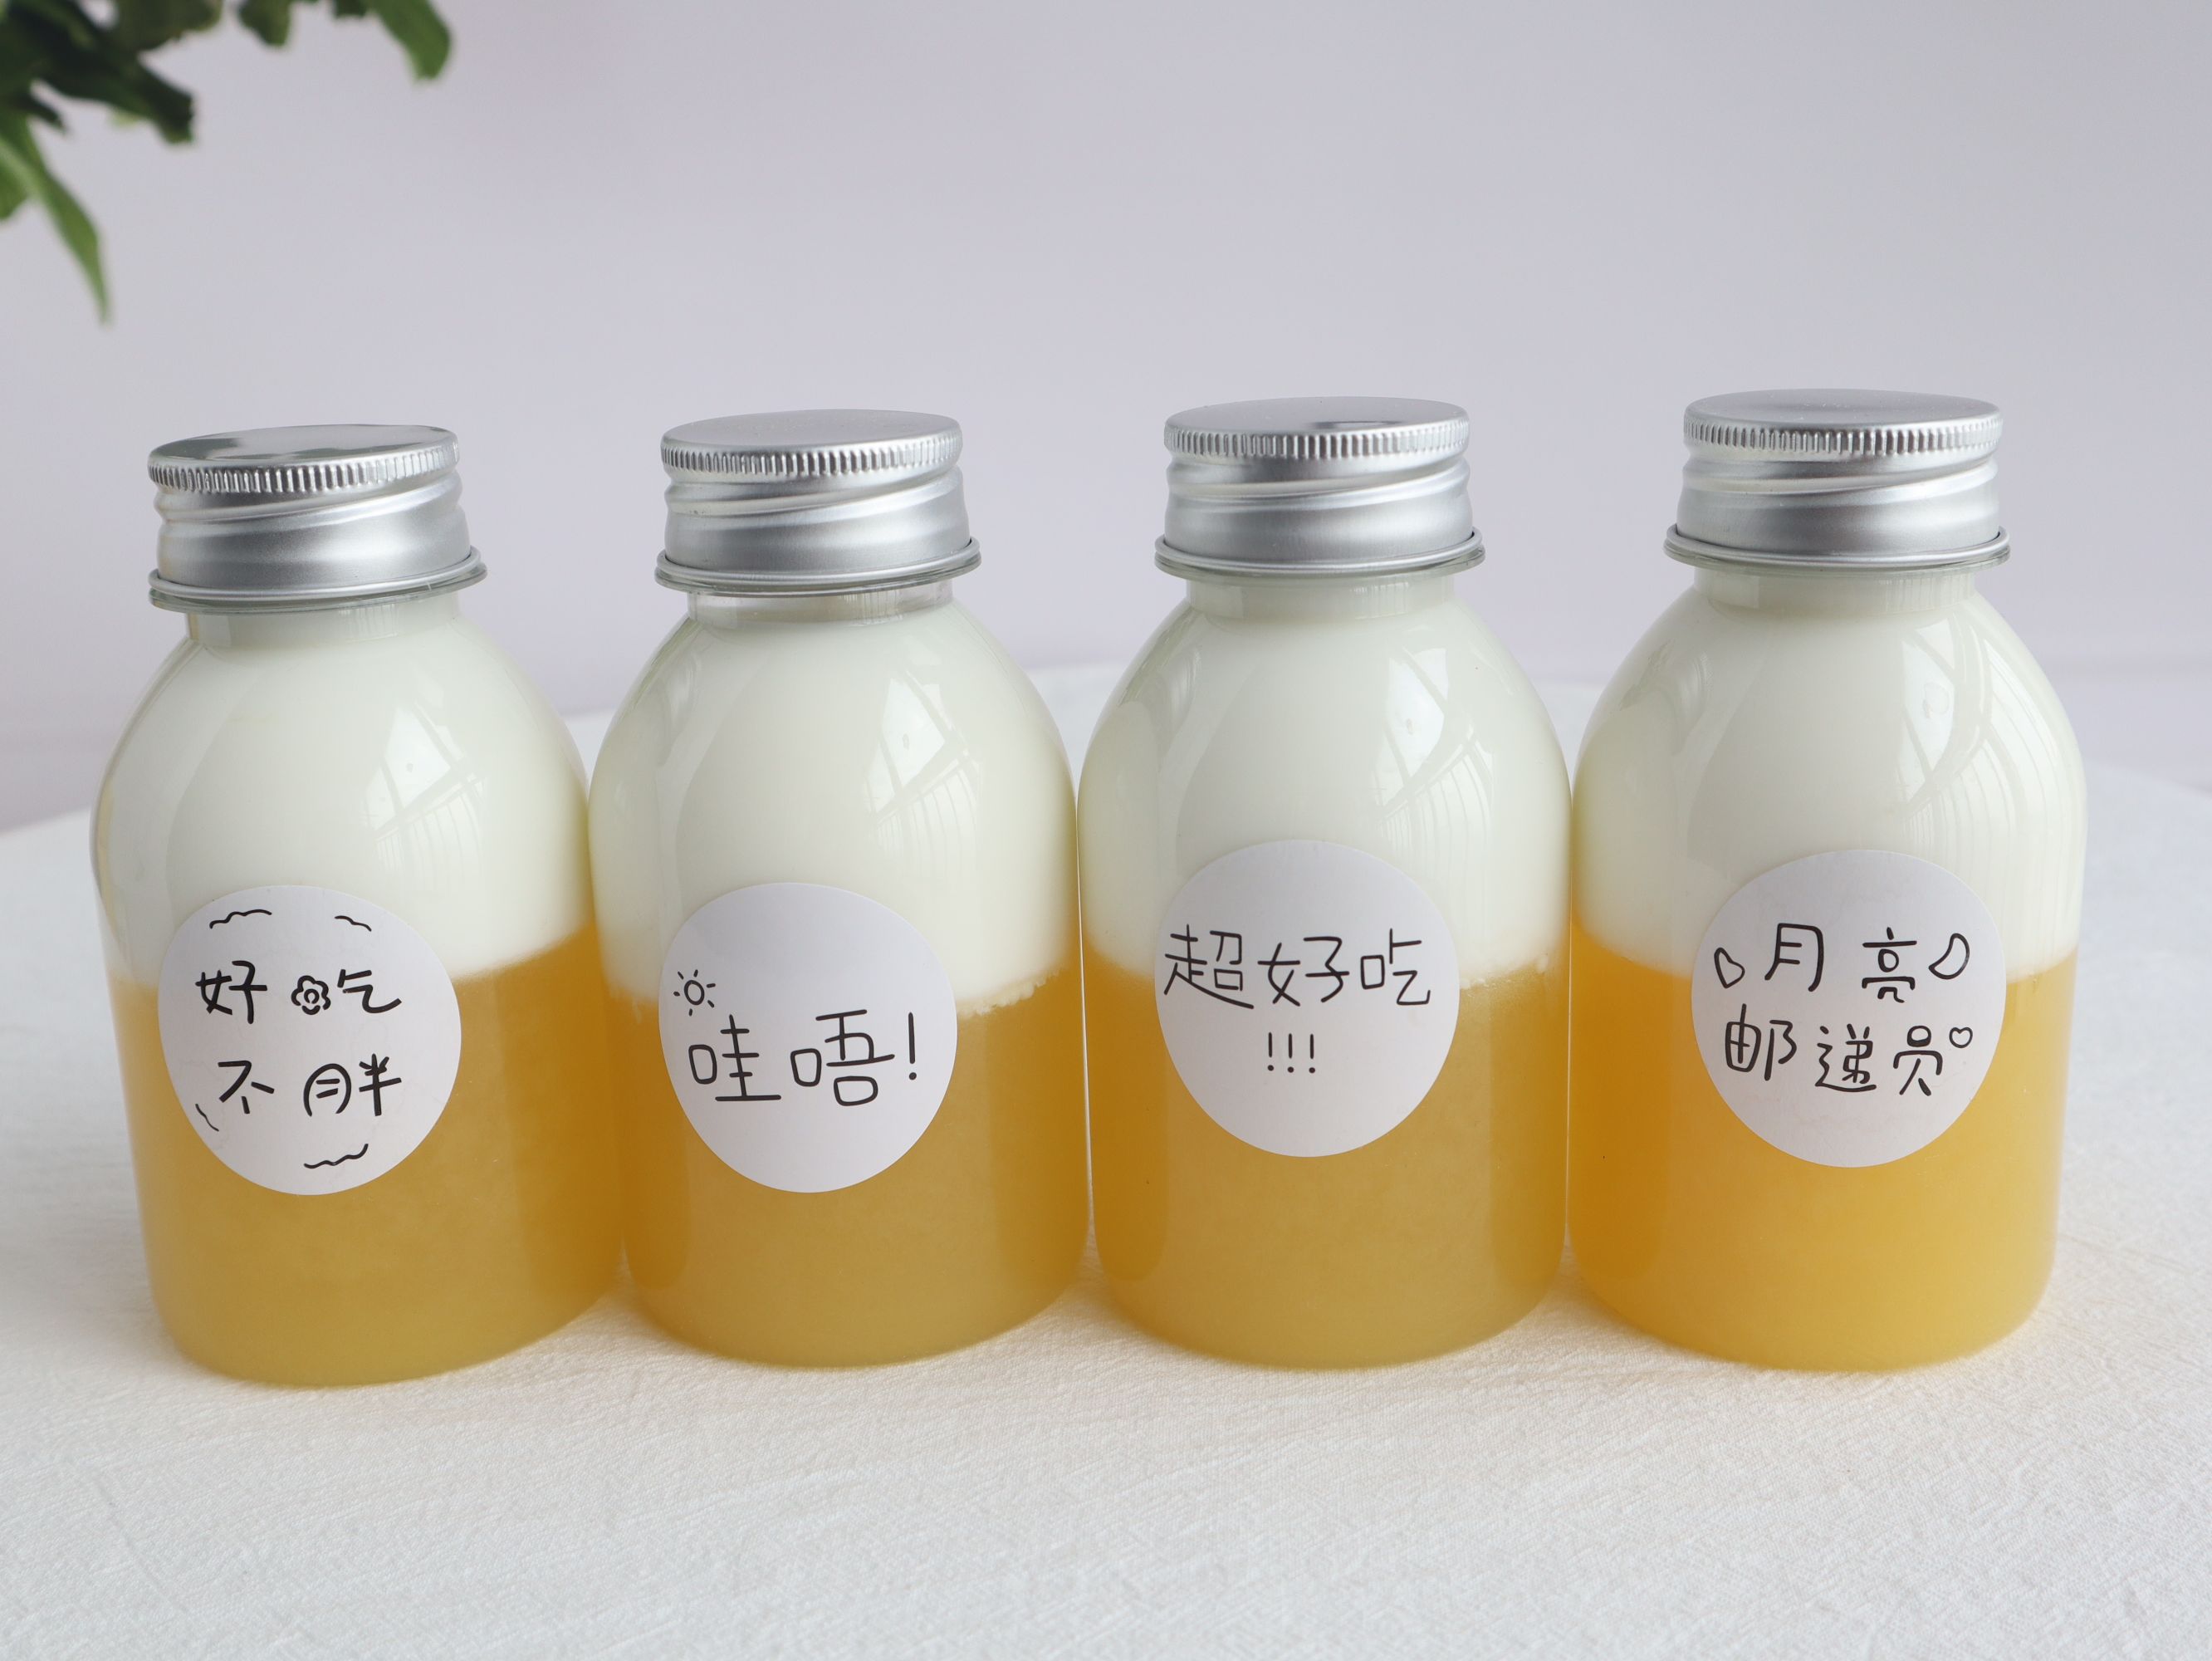 A Must-have Drink in Summer, Pineapple Jelly Hits Milk recipe